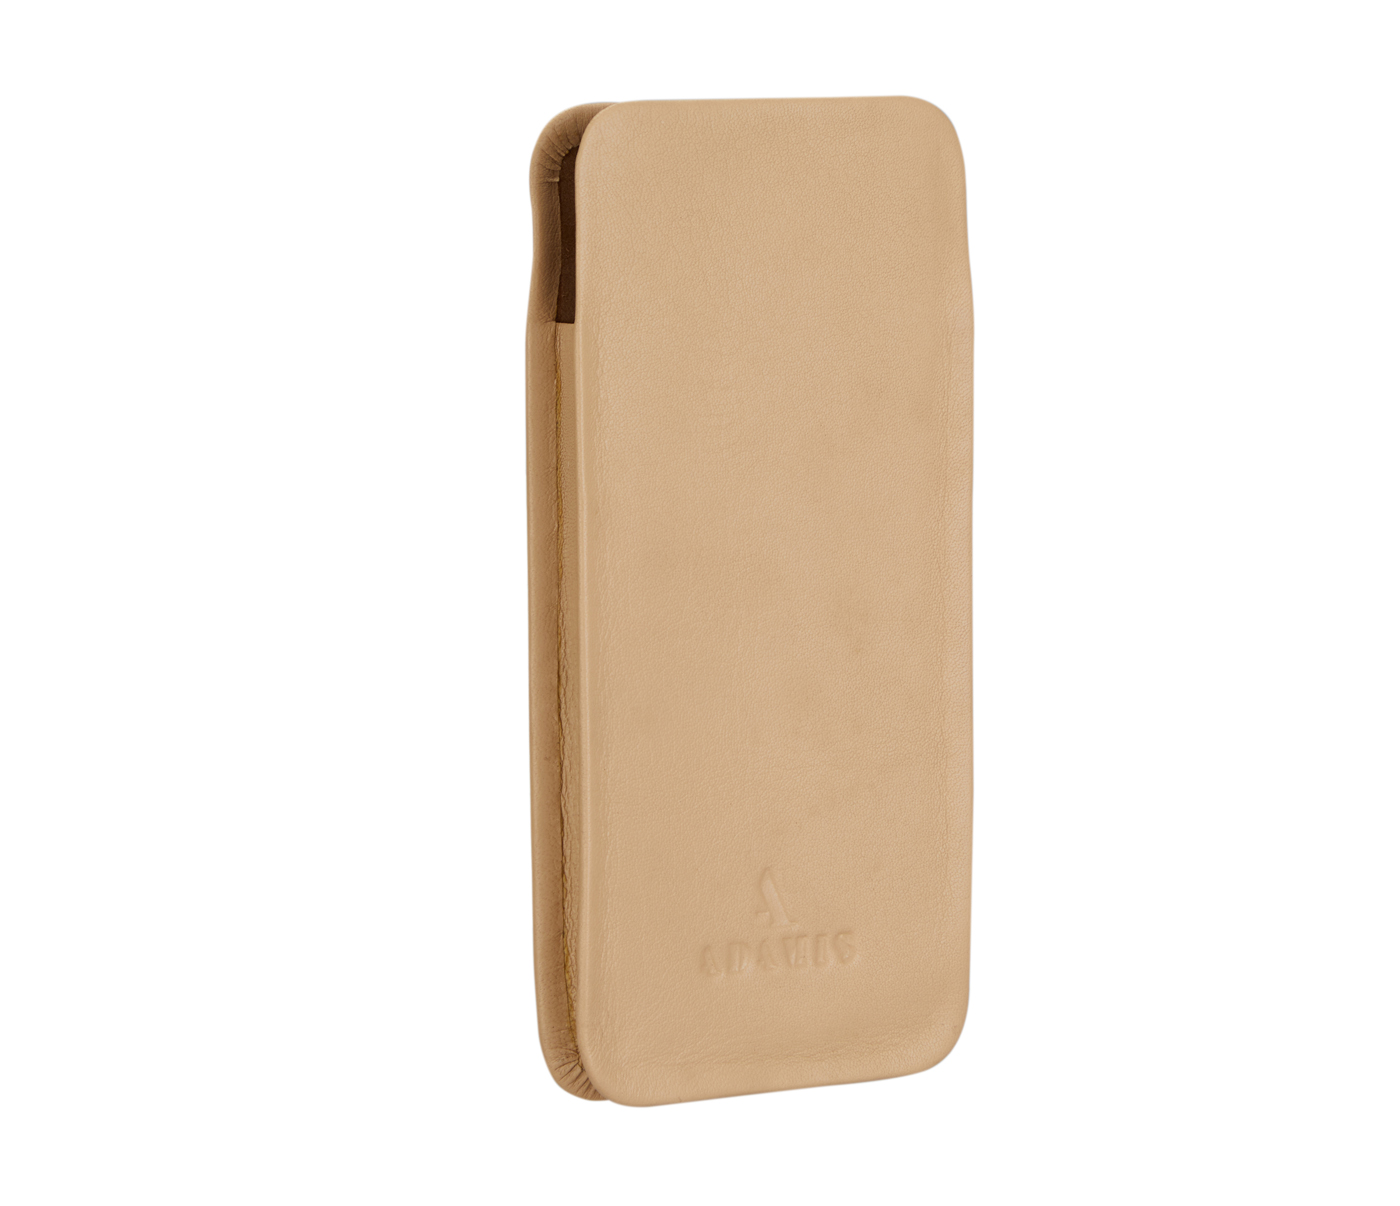 Spectacle Case--Soft stitch free spectacle case in Genuine Leather - Beige